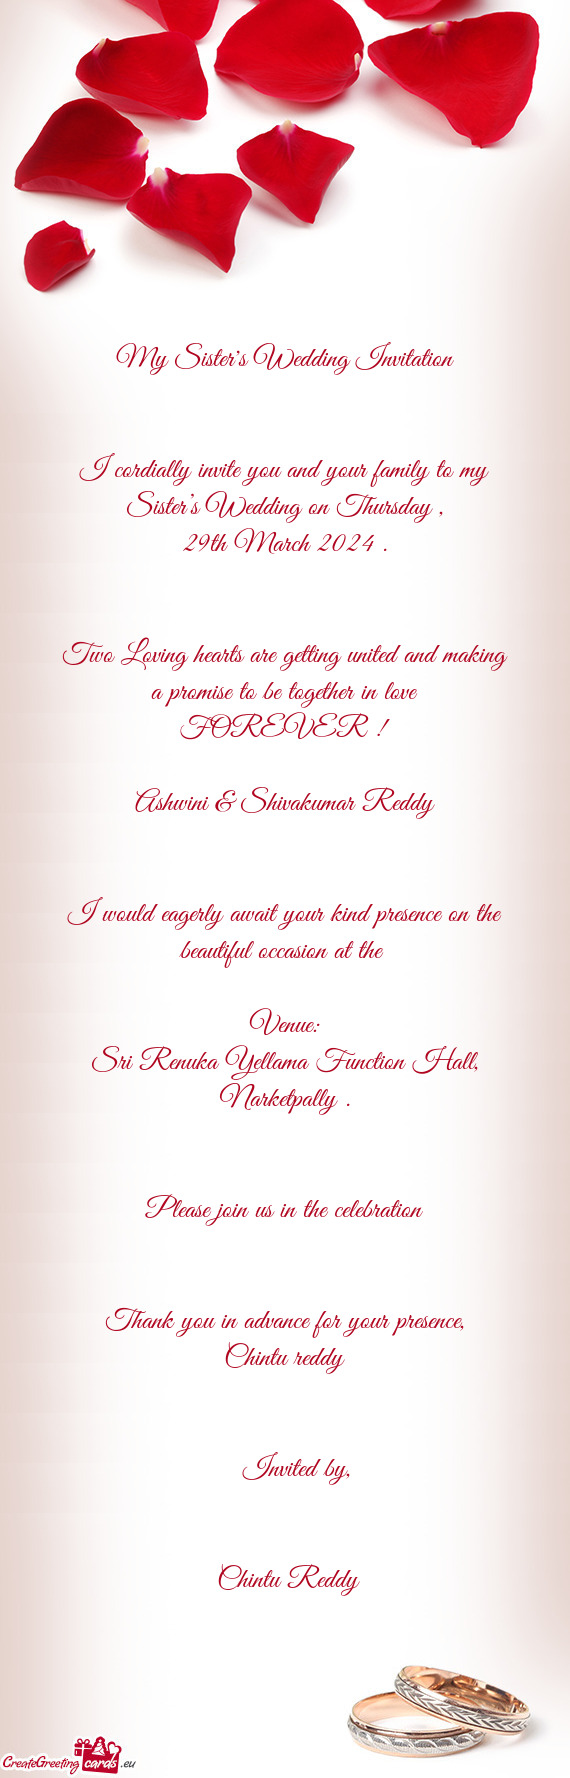 I cordially invite you and your family to my Sister’s Wedding on Thursday